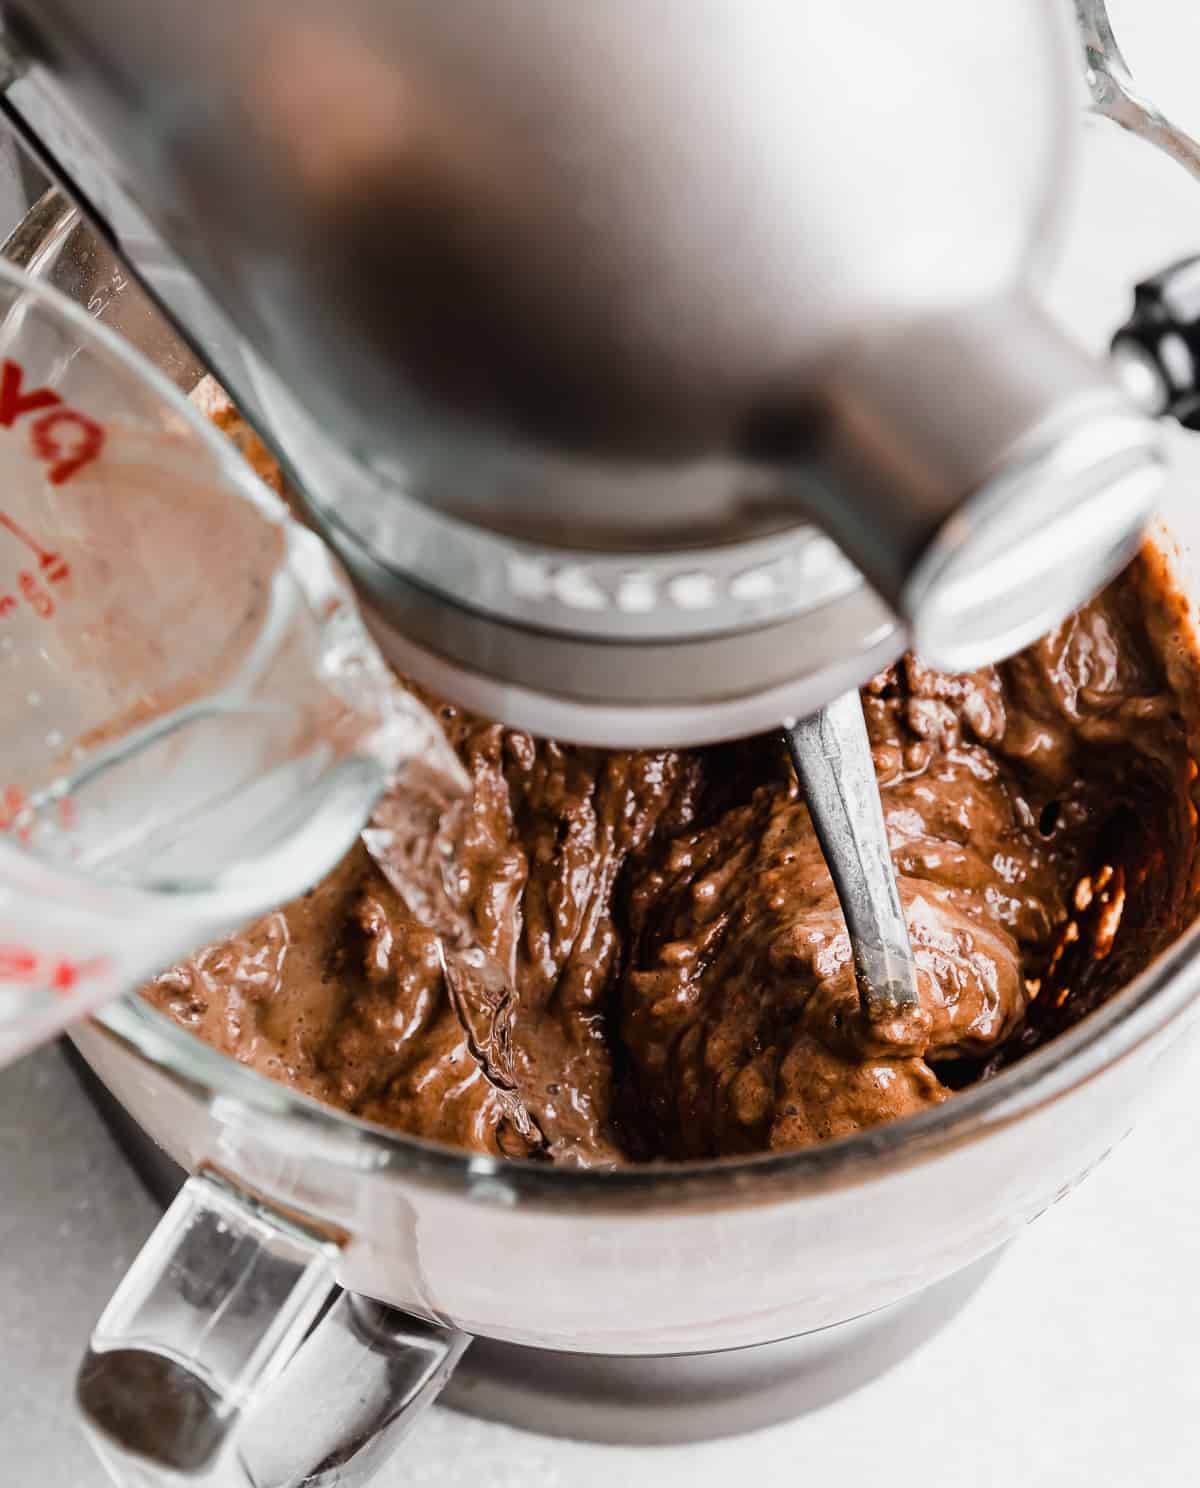 Hot water being poured into a stand mixer bowl that's stirring chocolate cake batter.